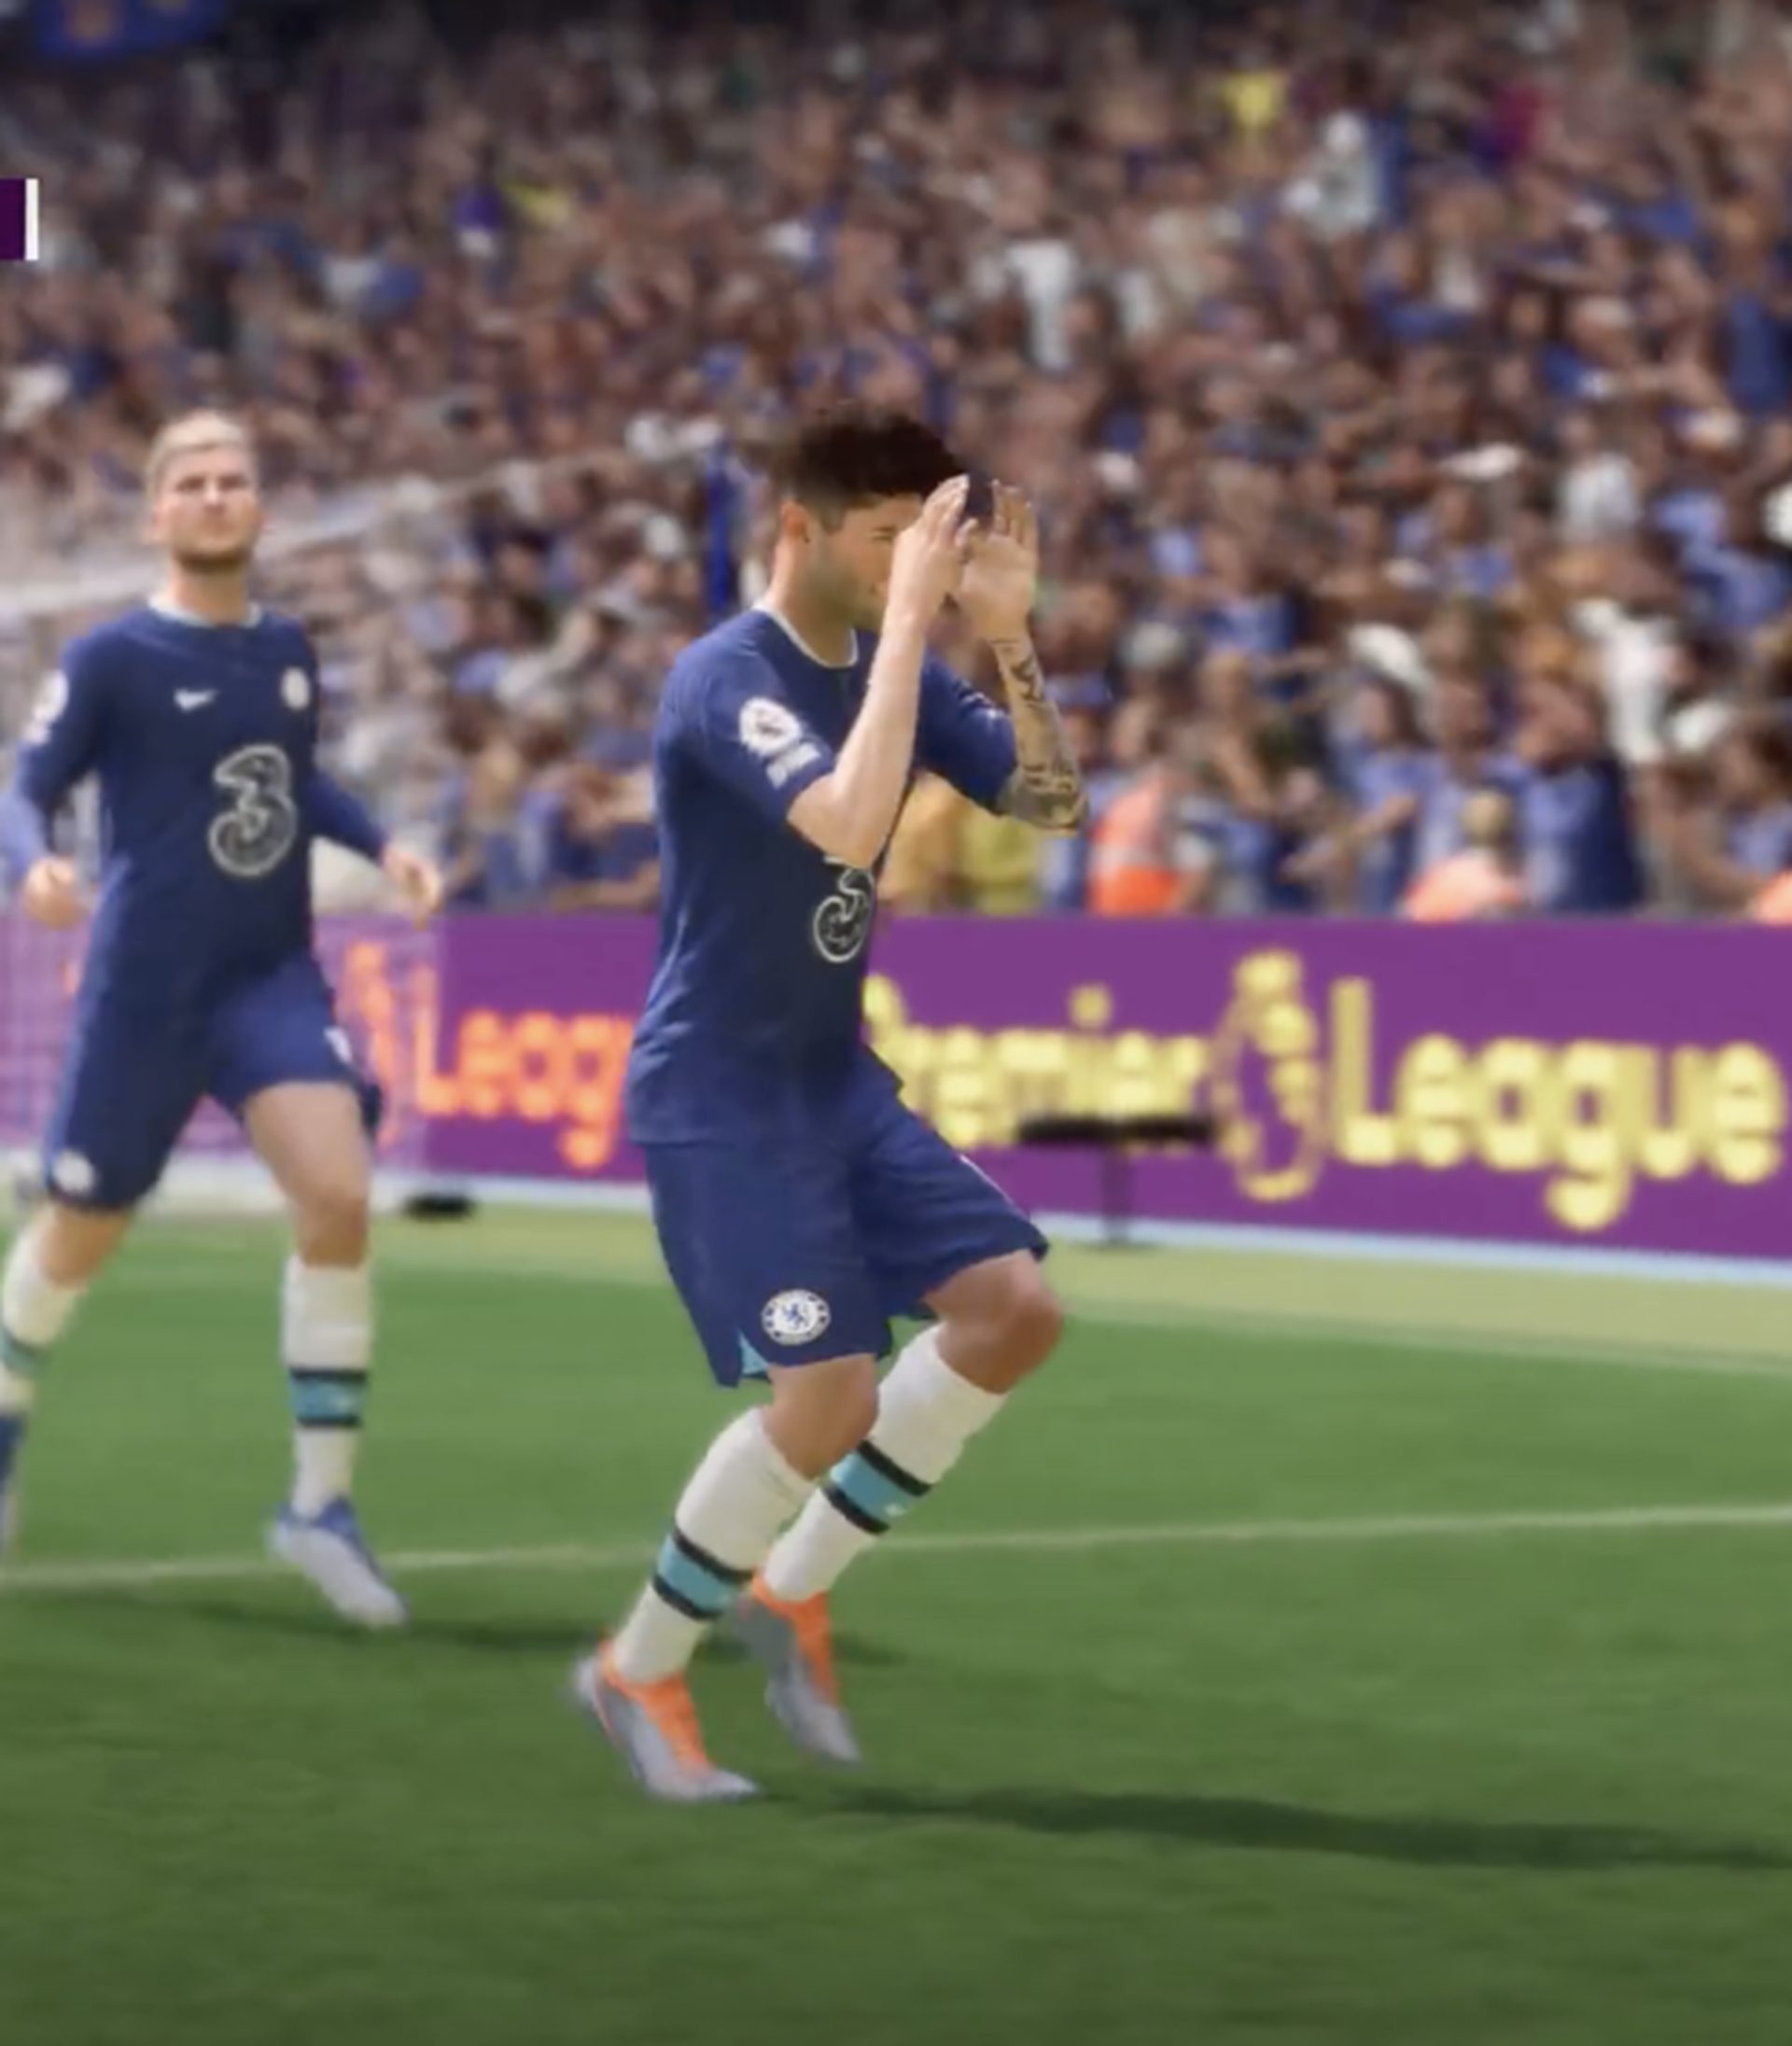 How to Griddy in FIFA 23?